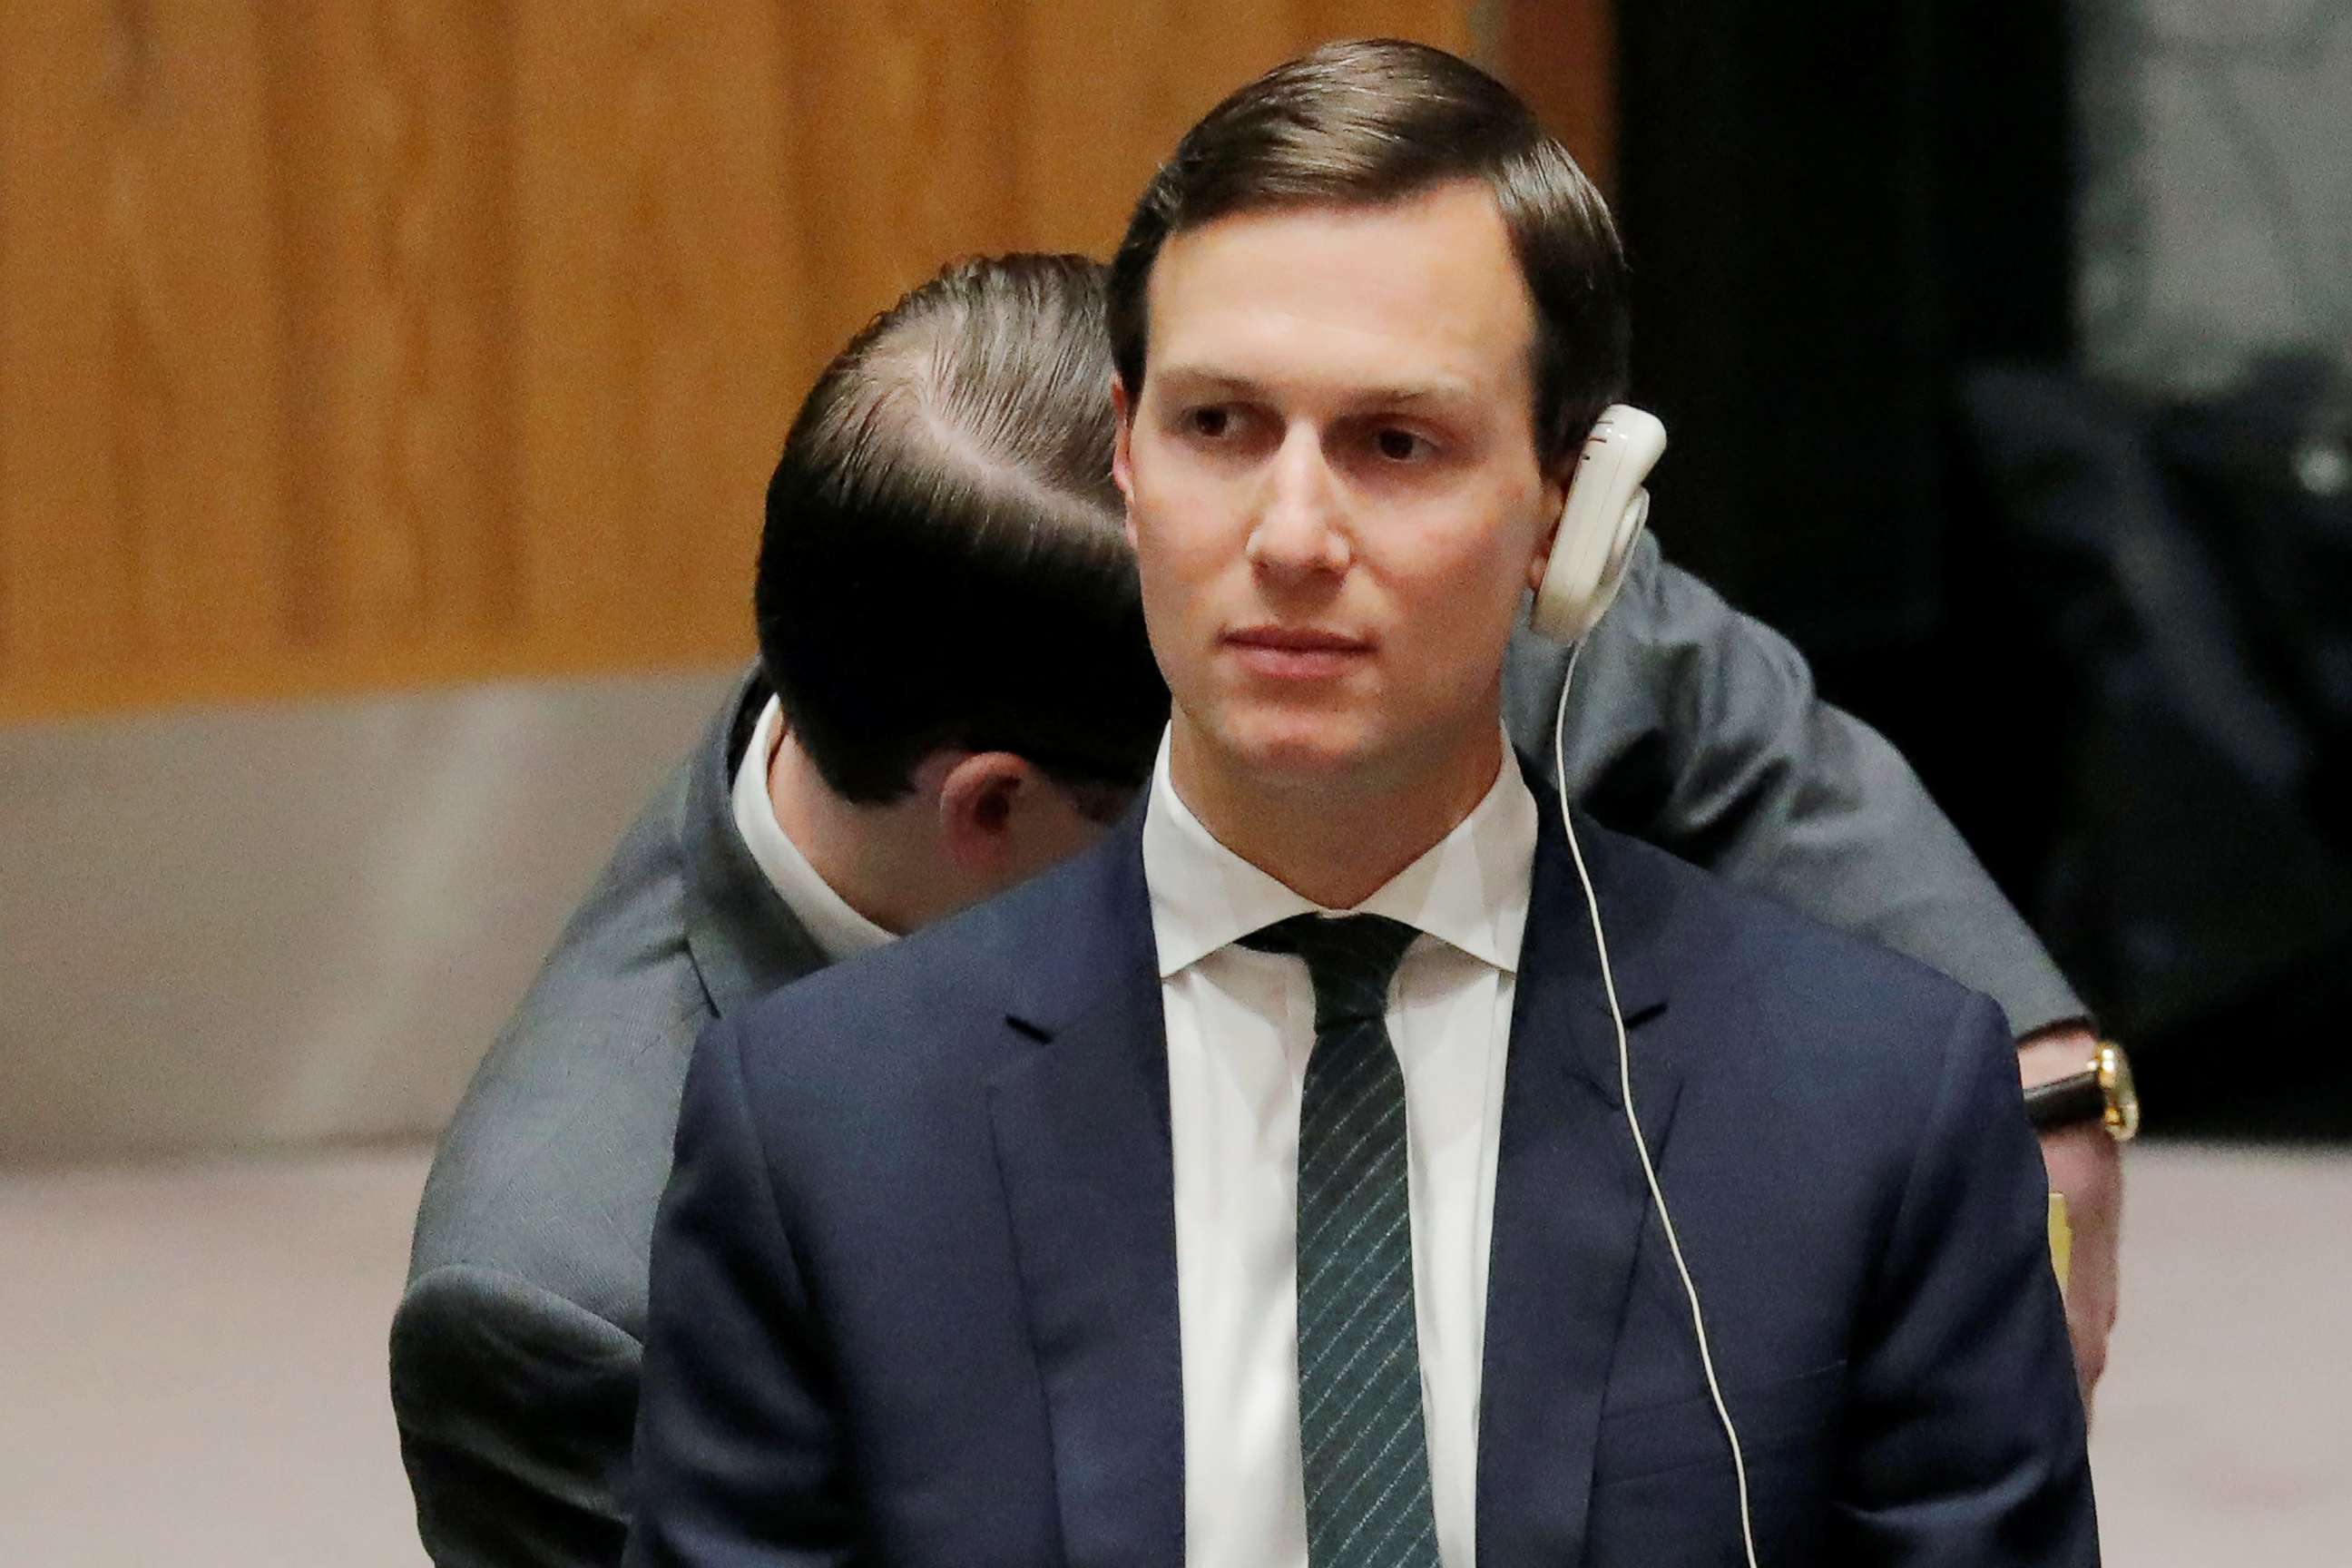 PHOTO: White House senior adviser Jared Kushner attends a Security Council meeting on the situation in the Middle East at the United Nations in New York, Feb. 20, 2018.  